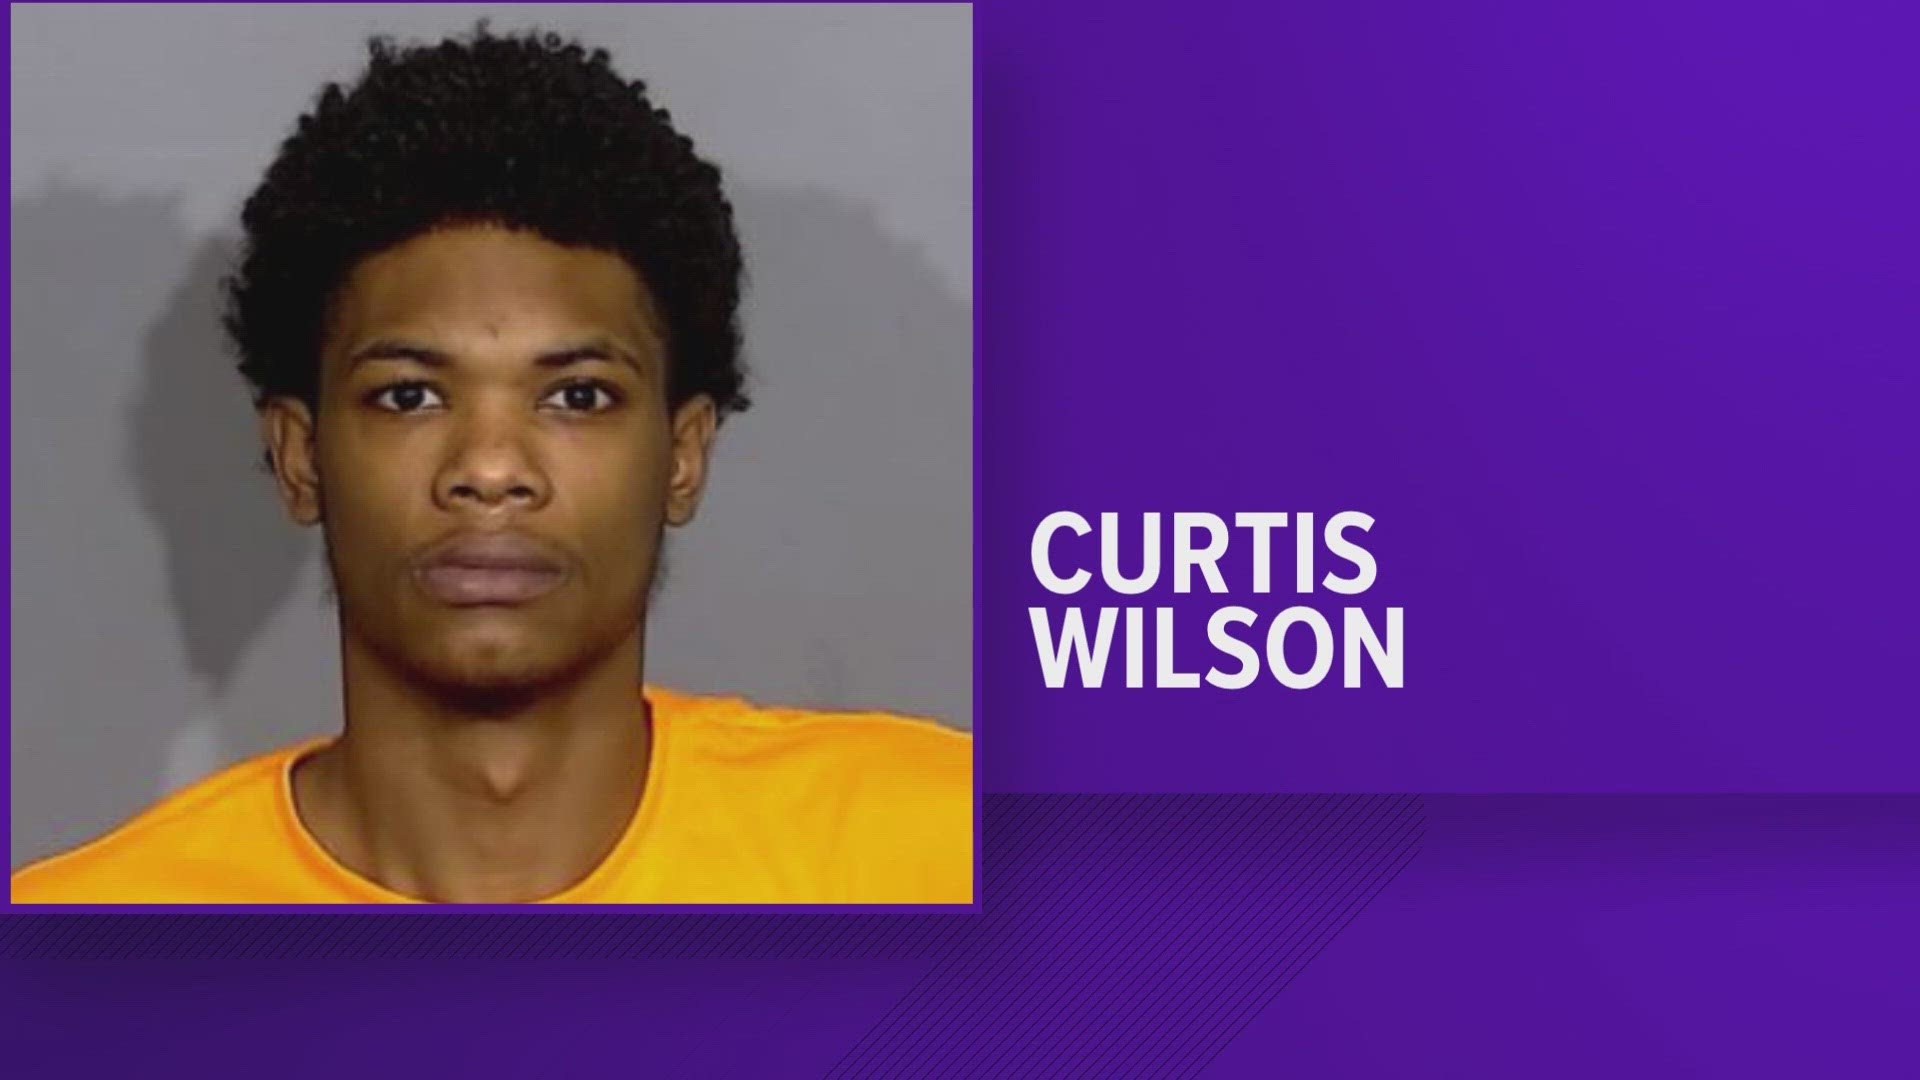 Curtis Wilson was sentenced to 4 years in prison with one year having been suspended.